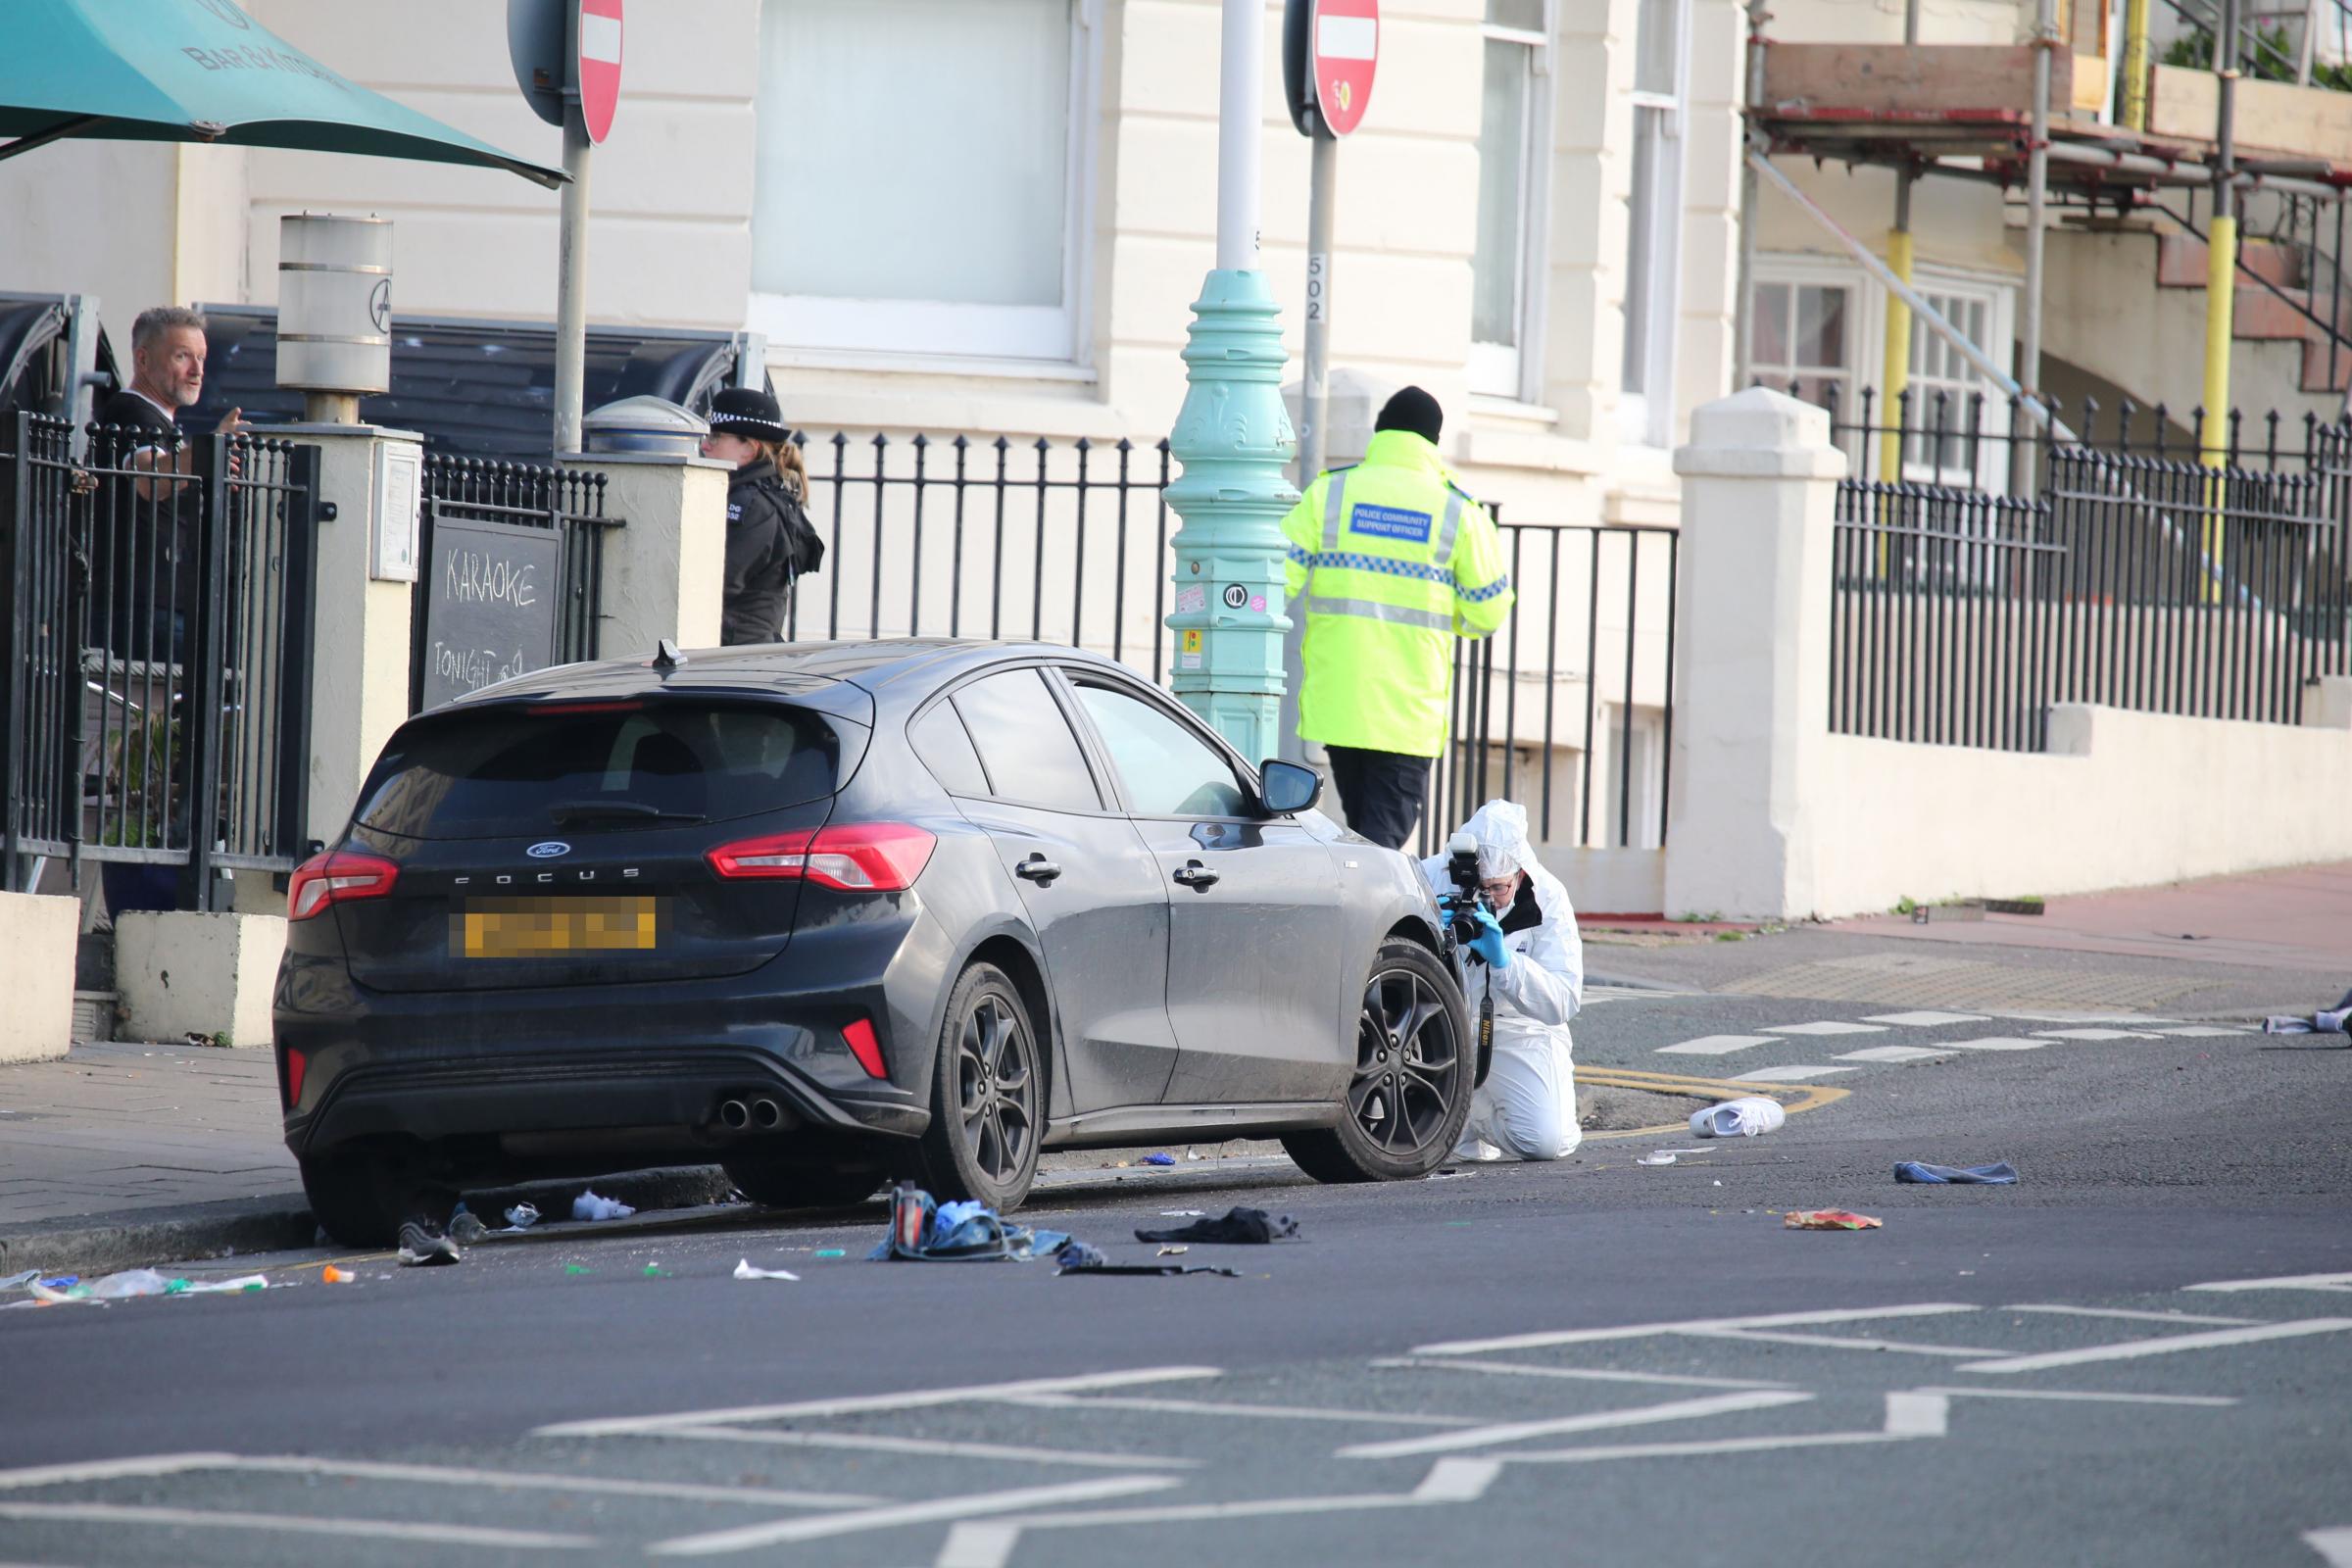 Three persons runover on marine parade brighton , not terror related, two gangs fighting.